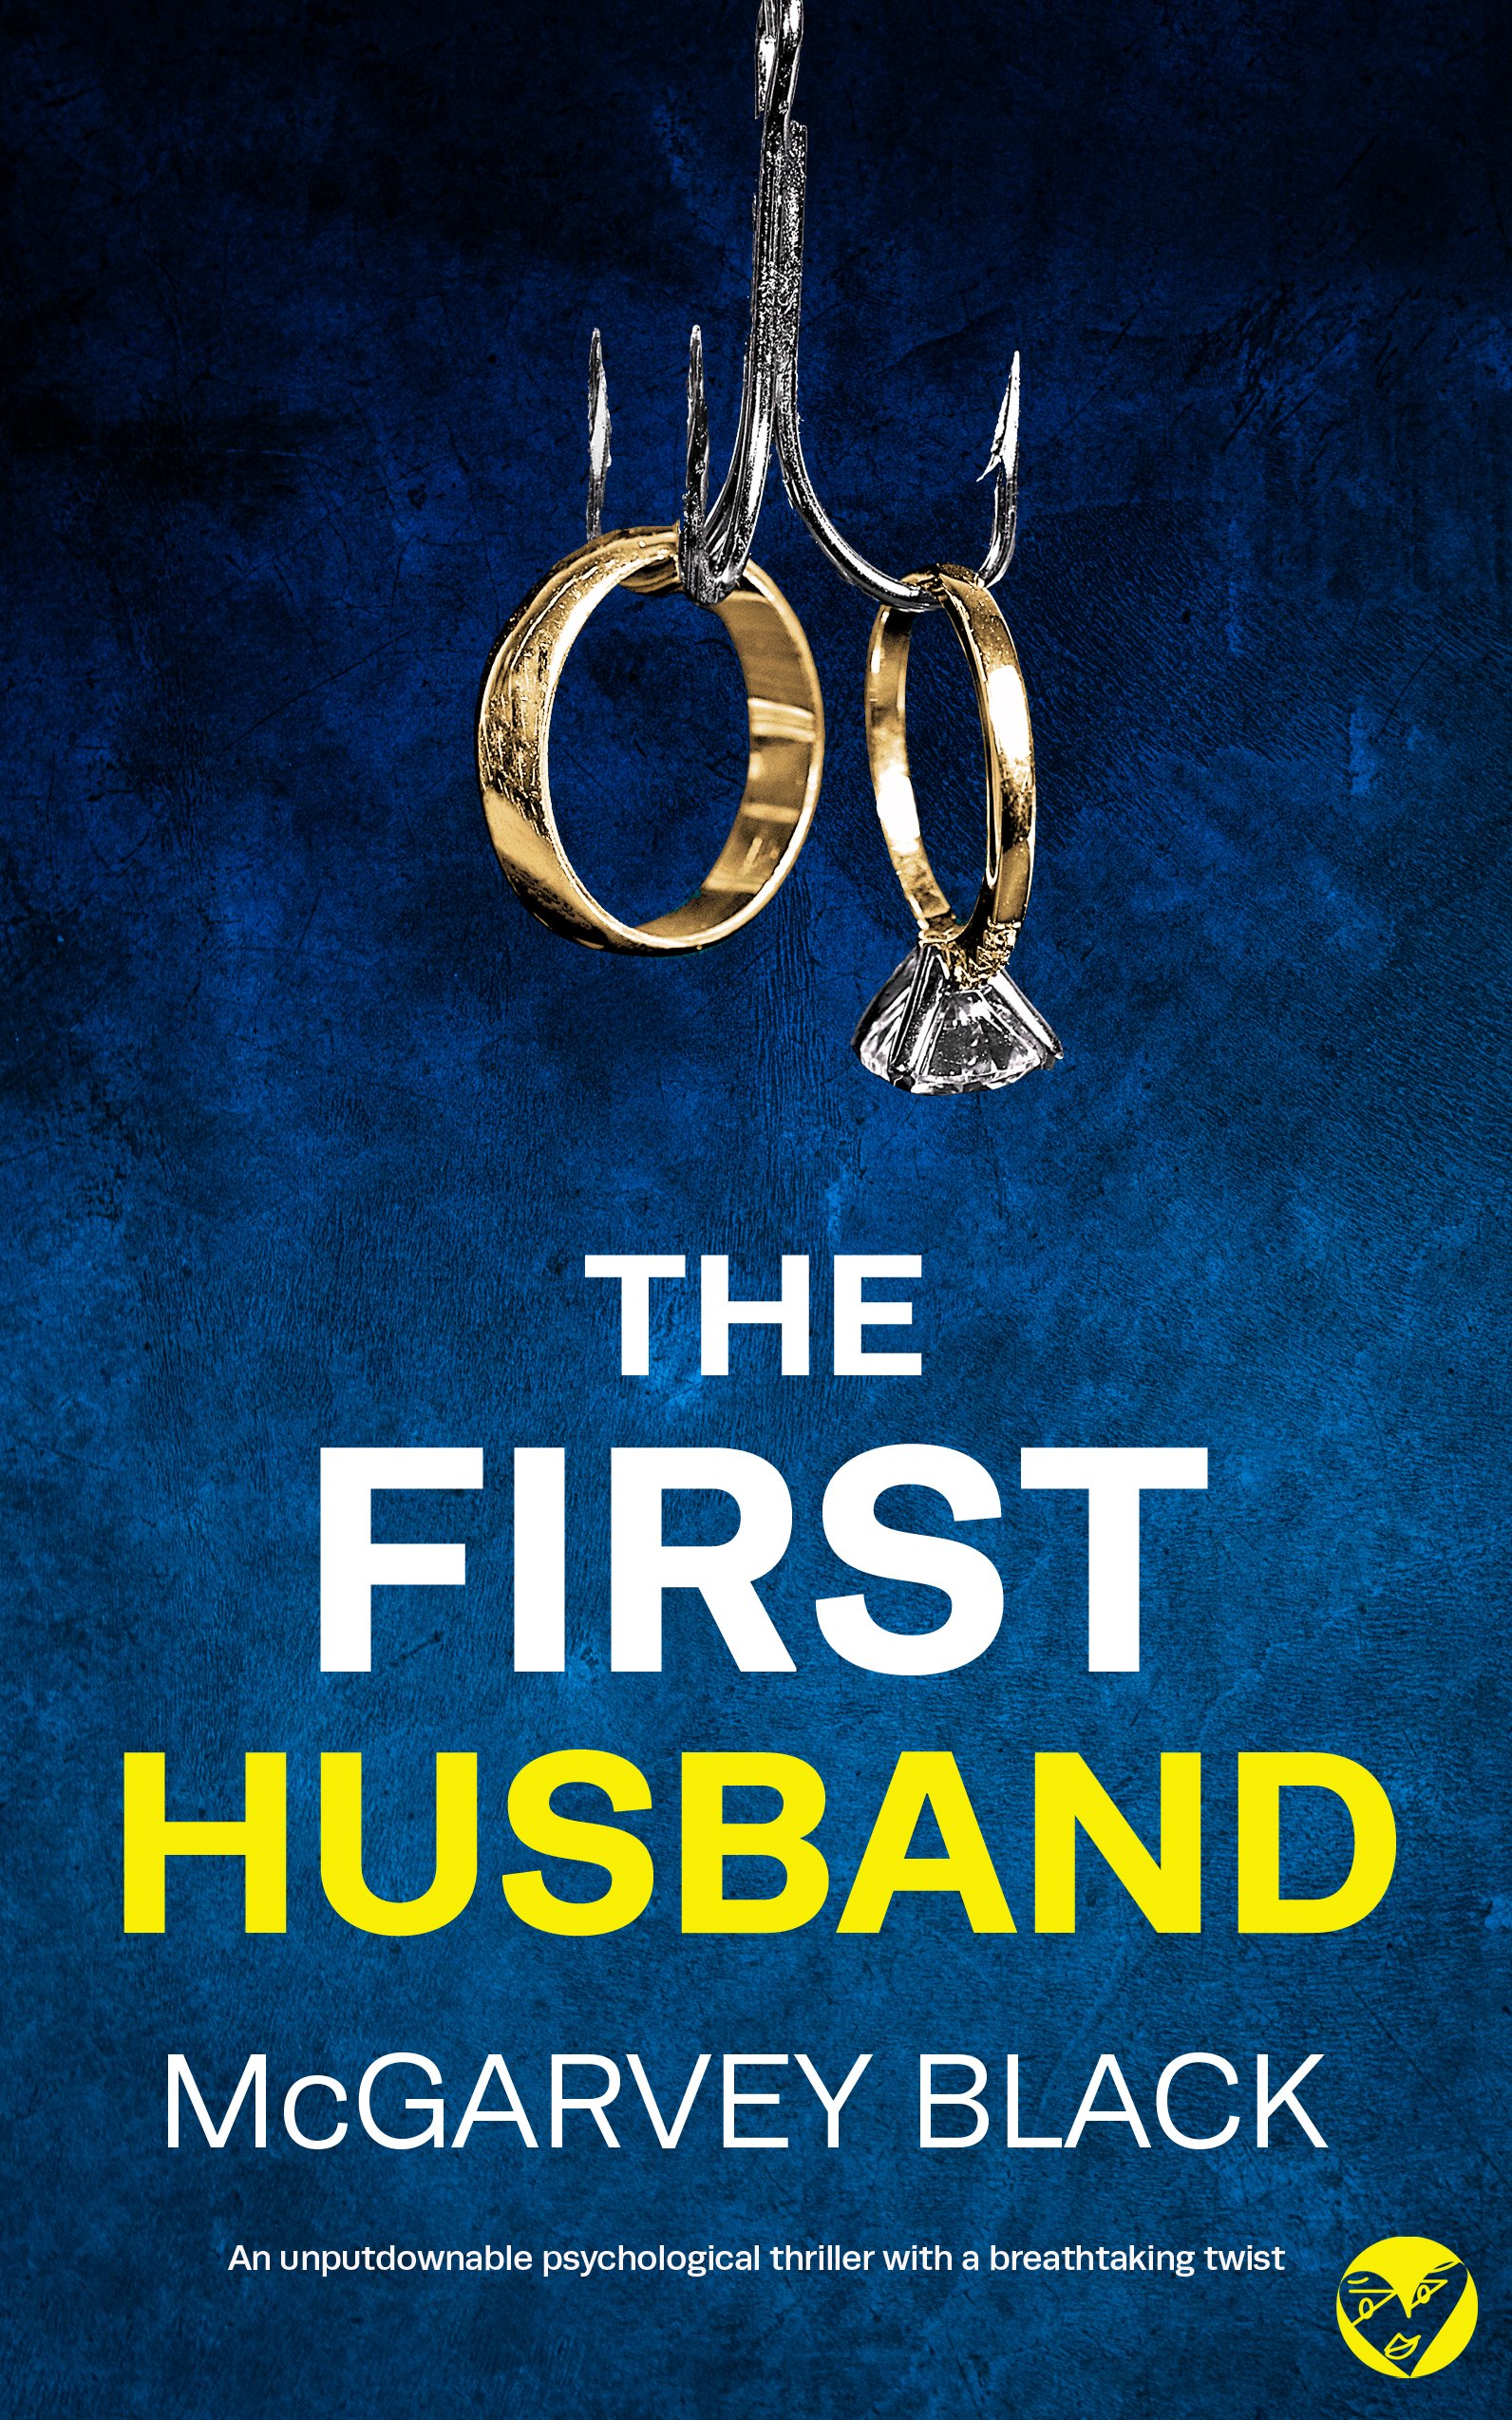 THE FIRST HUSBAND Cover publish .jpg